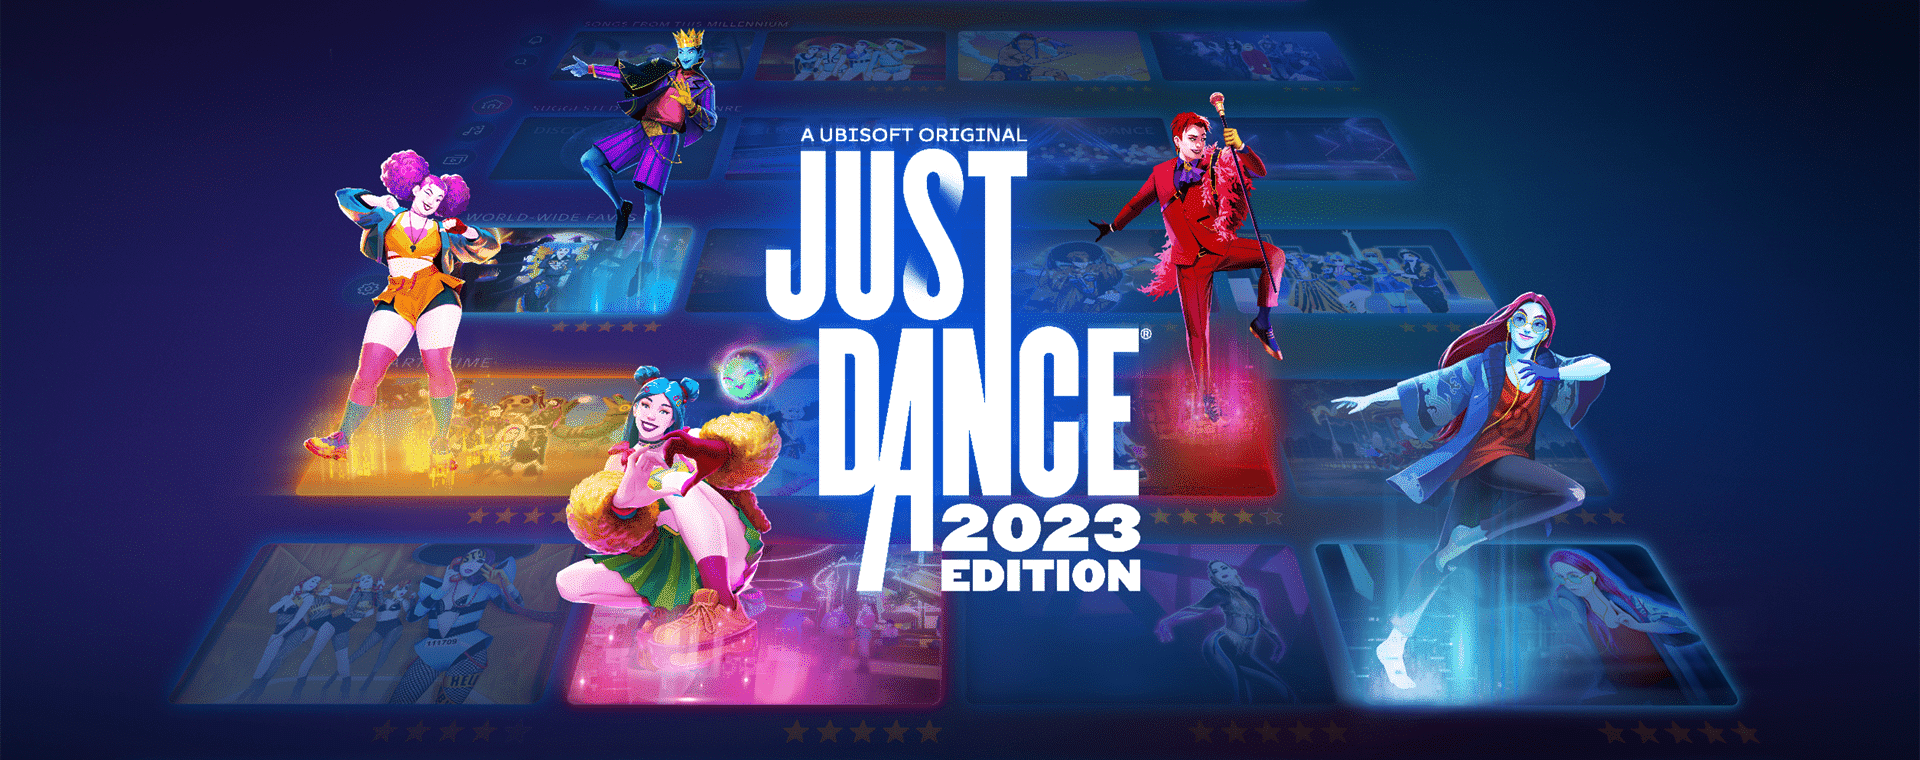 verwarring Bewijs Verdeel Review: Just Dance 2023 is a new chapter for the franchise